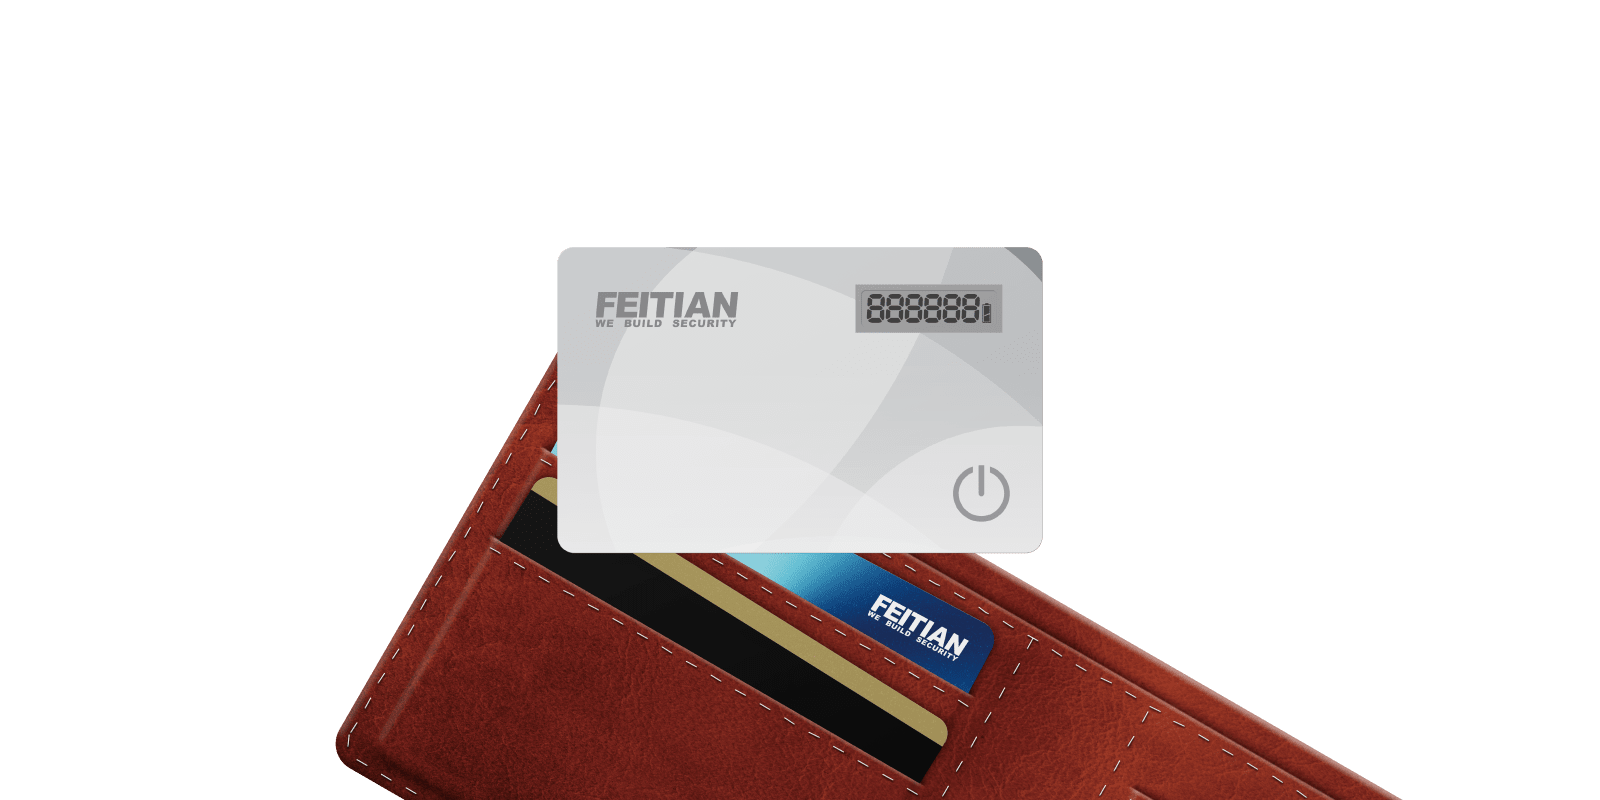 FEITIAN OTP OATH Event-based [HOTP] 2FA Display Card | VC-100